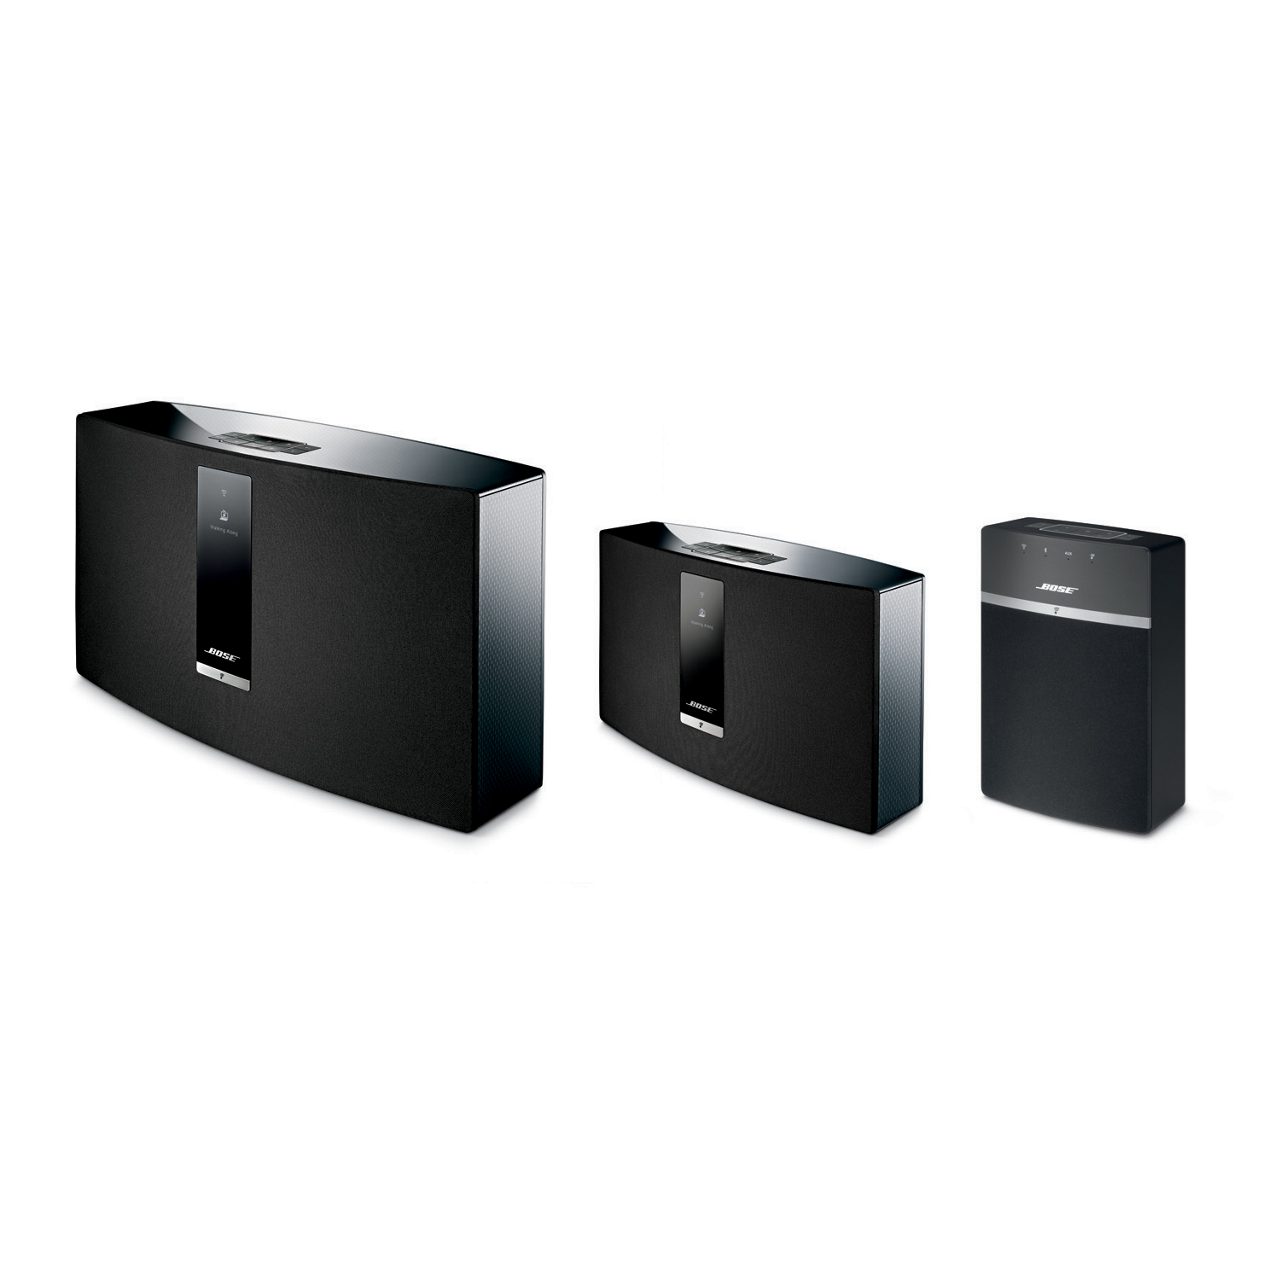 Bose Global Press Room Bose Announces Next Generation Soundtouch® Wireless Systems With 4312